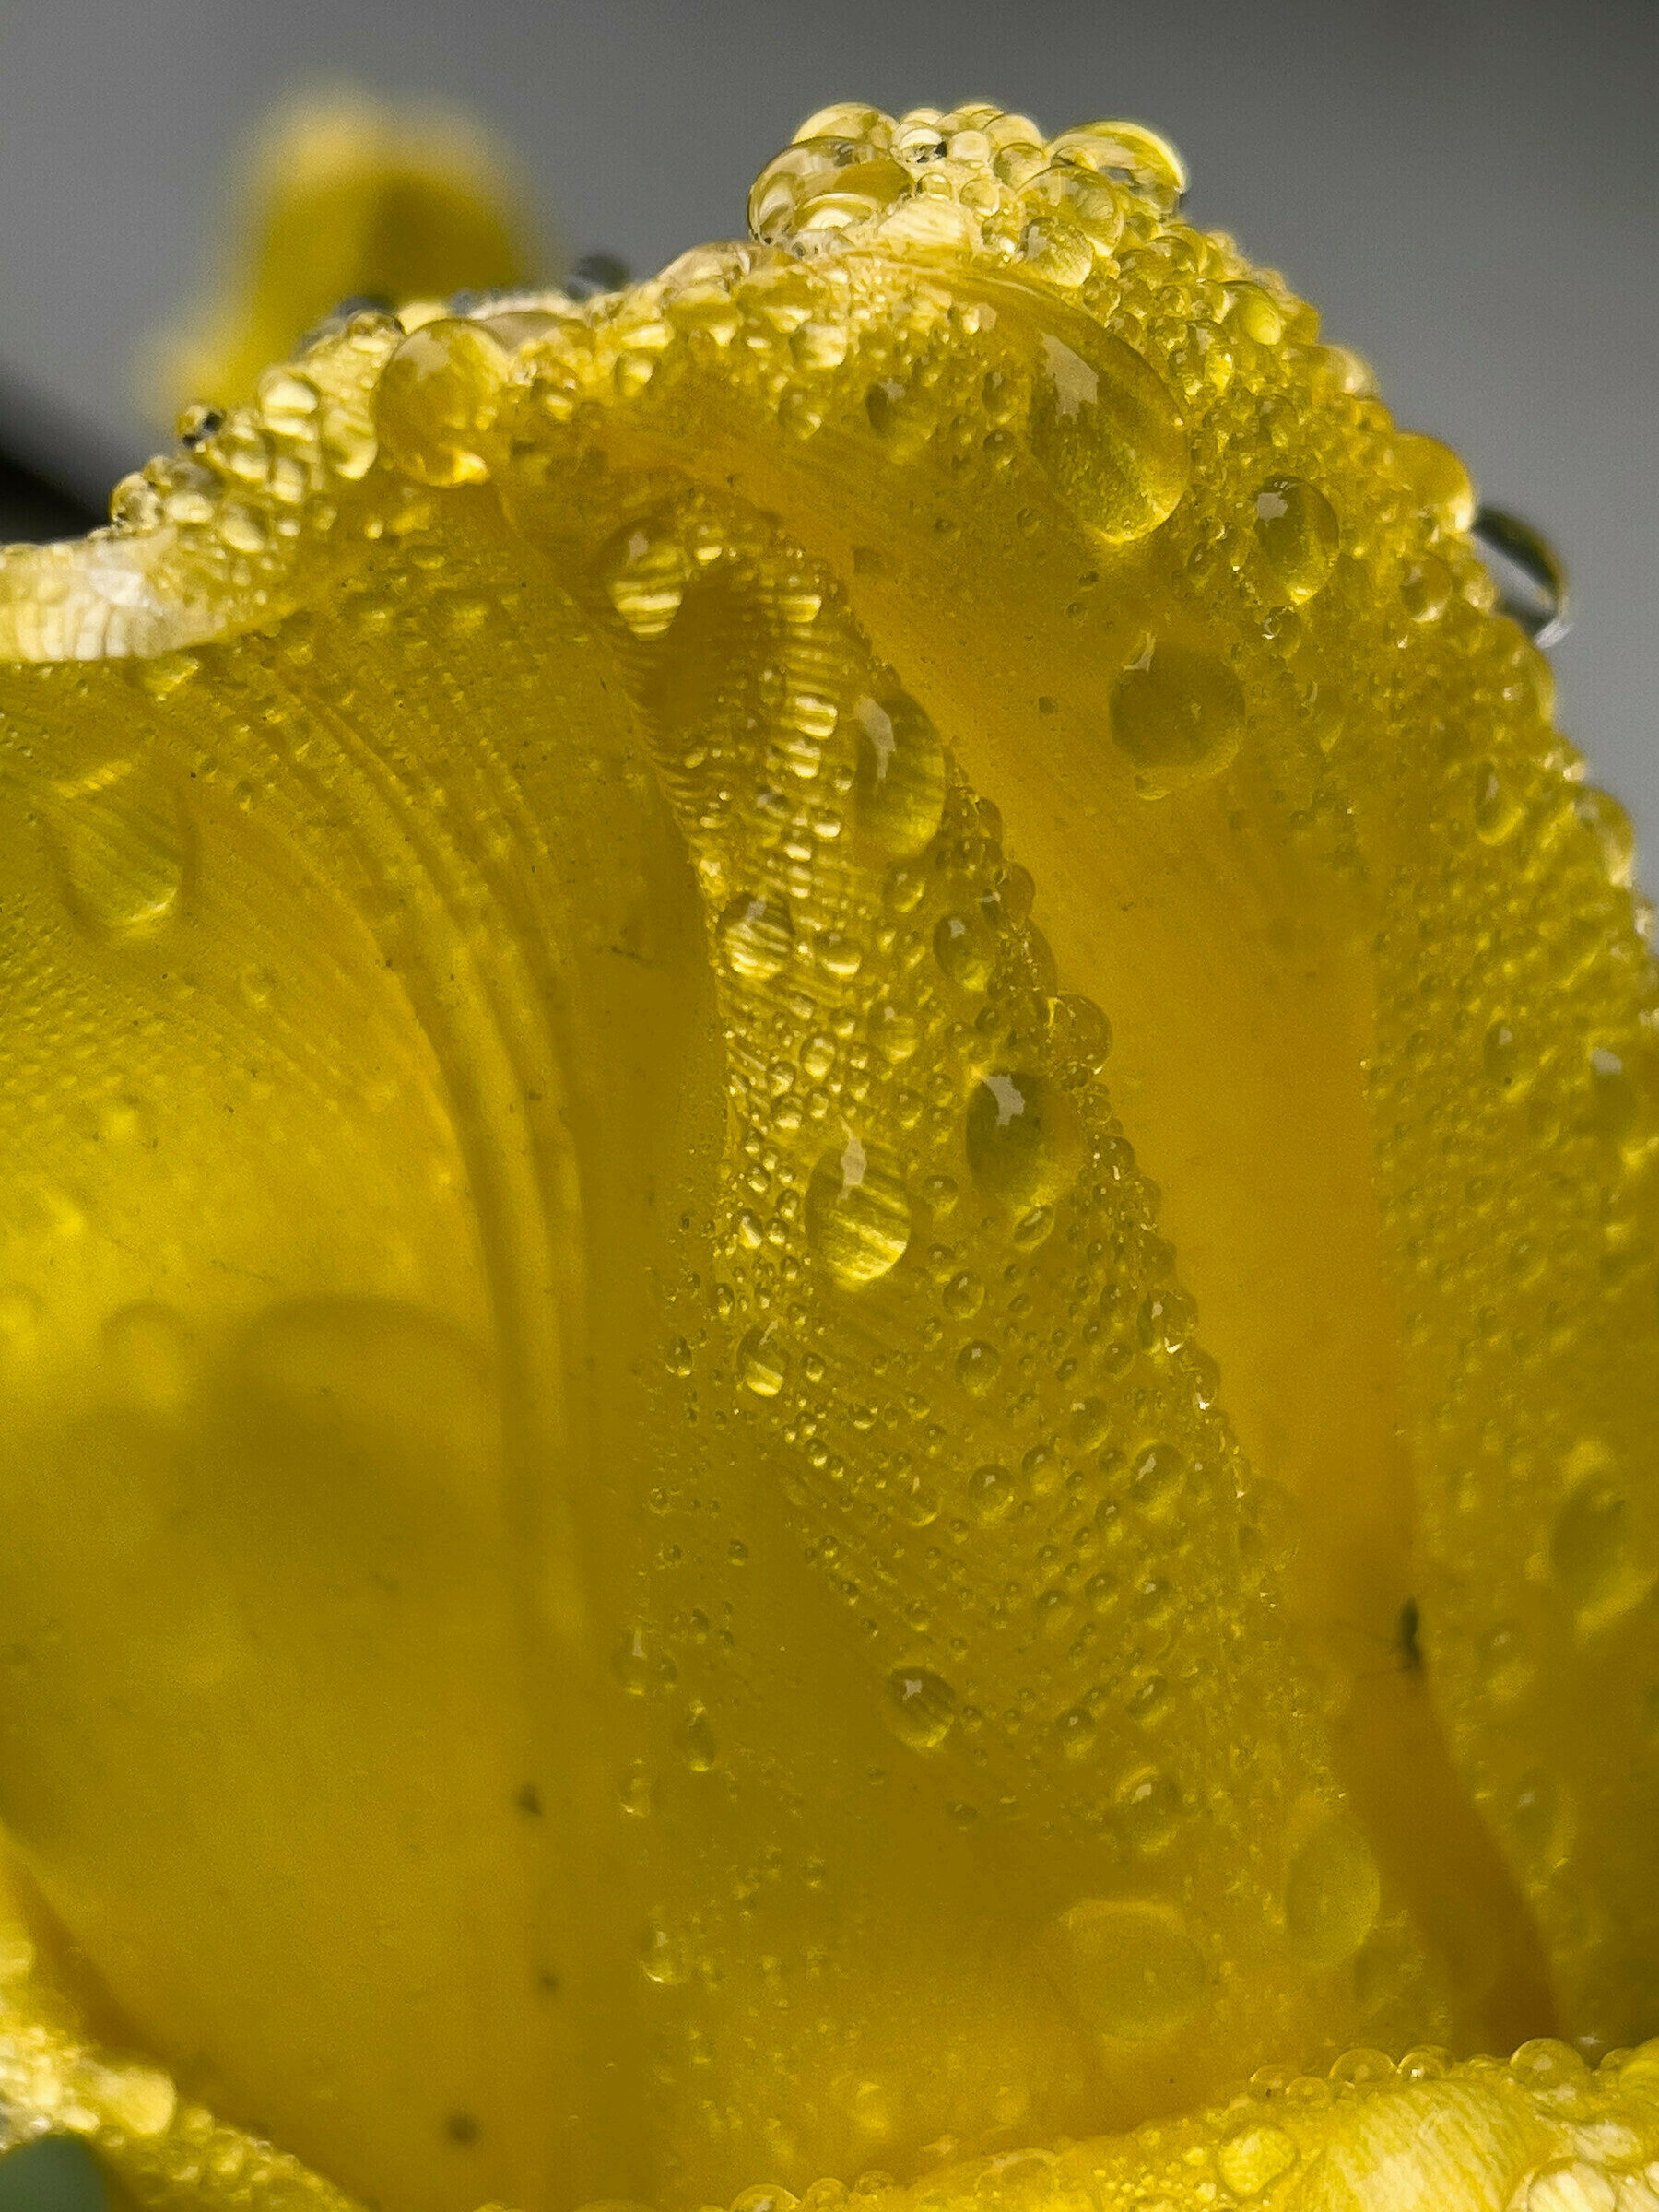 macro shot of a yellow tulip petal covered in dew or raindrops.